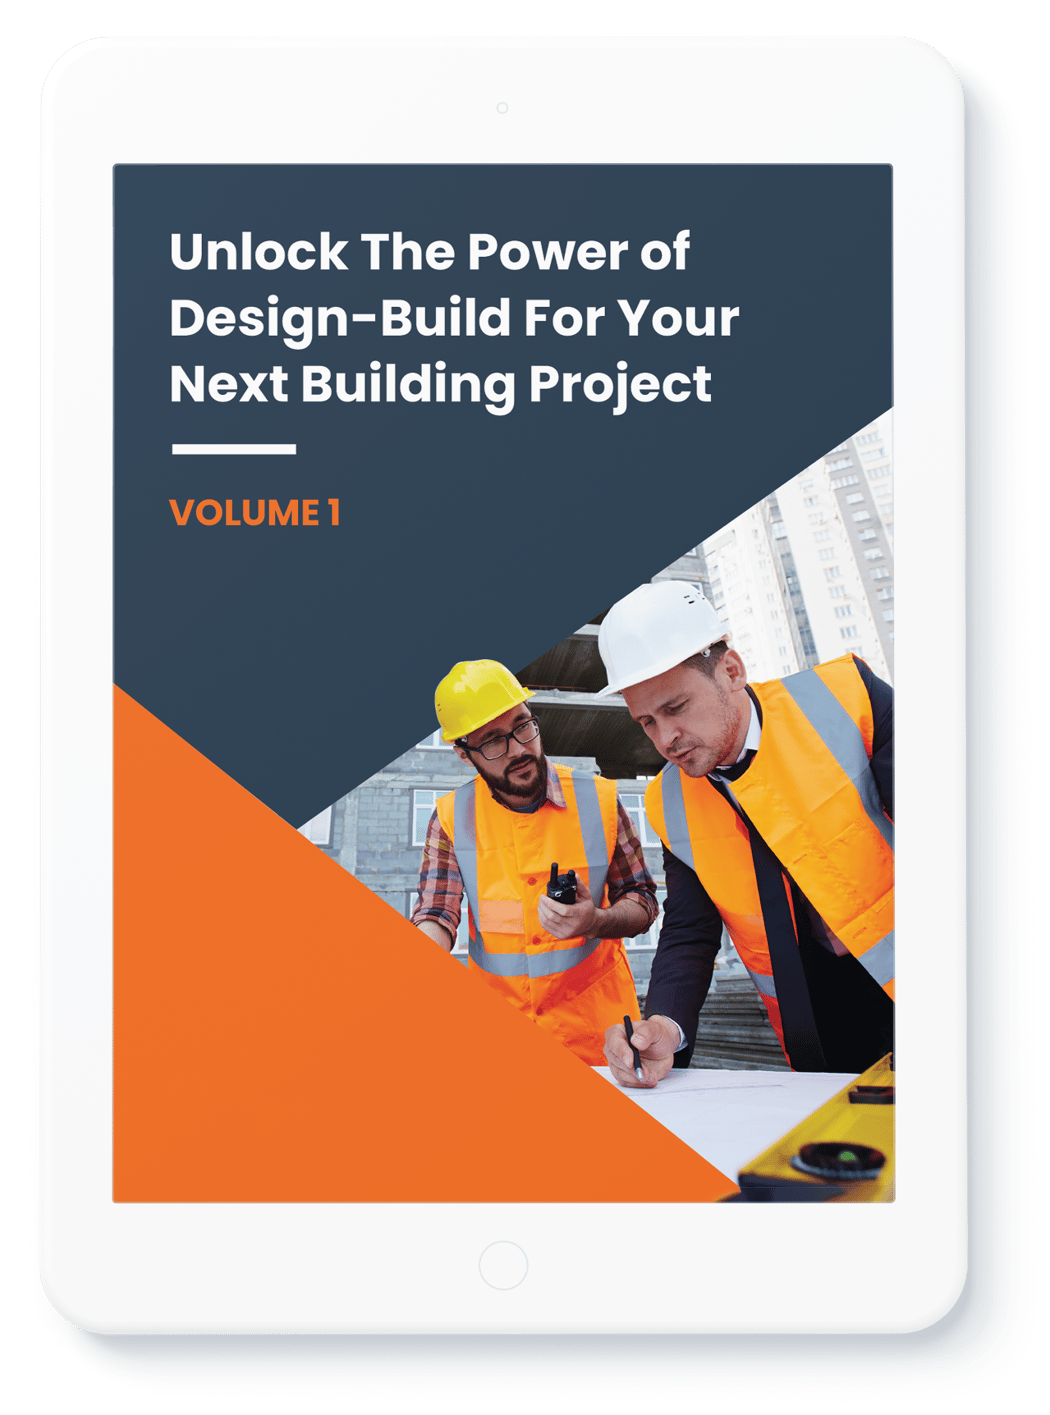 Unlock the Power of Design-Build for Your Next Building Project, Volume 1